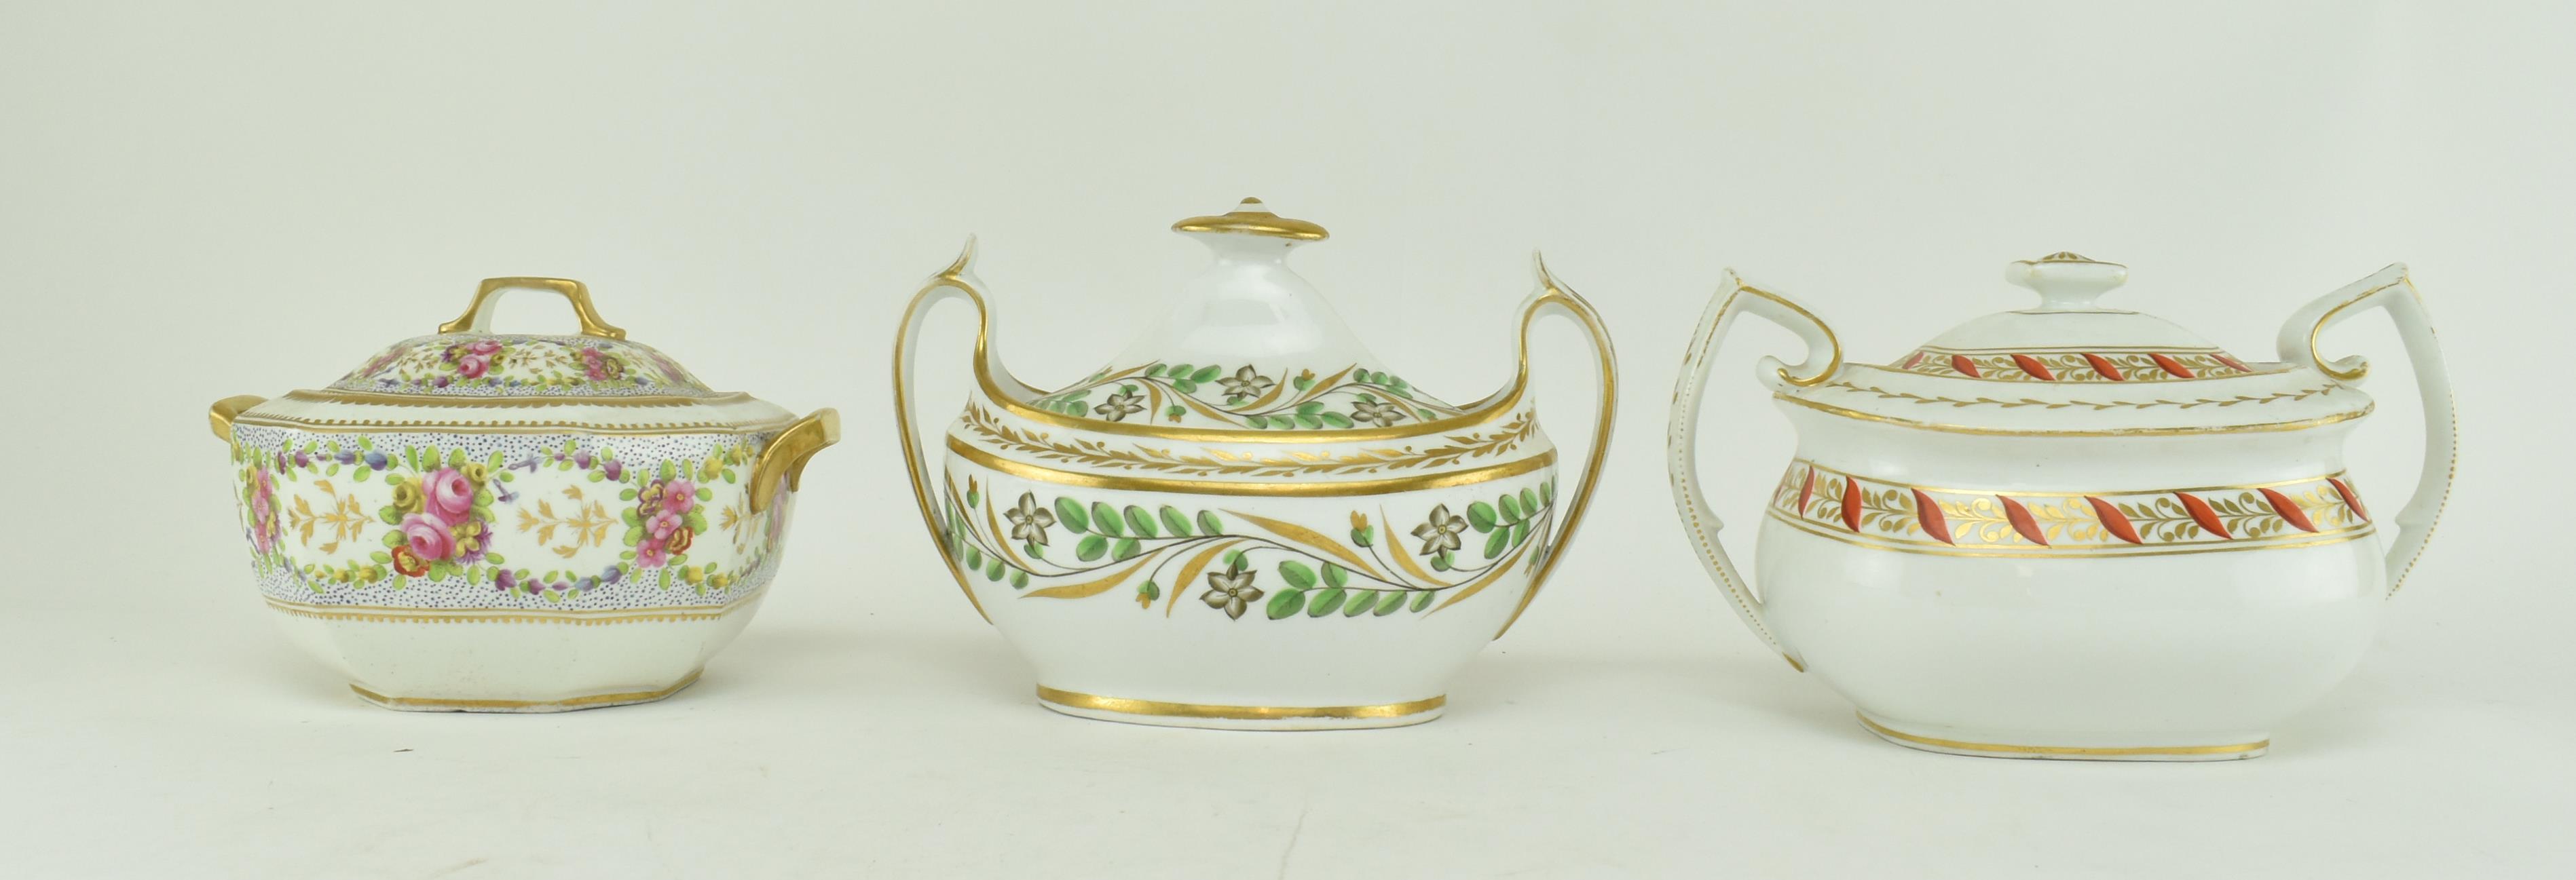 THREE EARLY 19TH CENTURY PORCELAIN SMALL LIDDED SUGAR POTS - Image 2 of 8